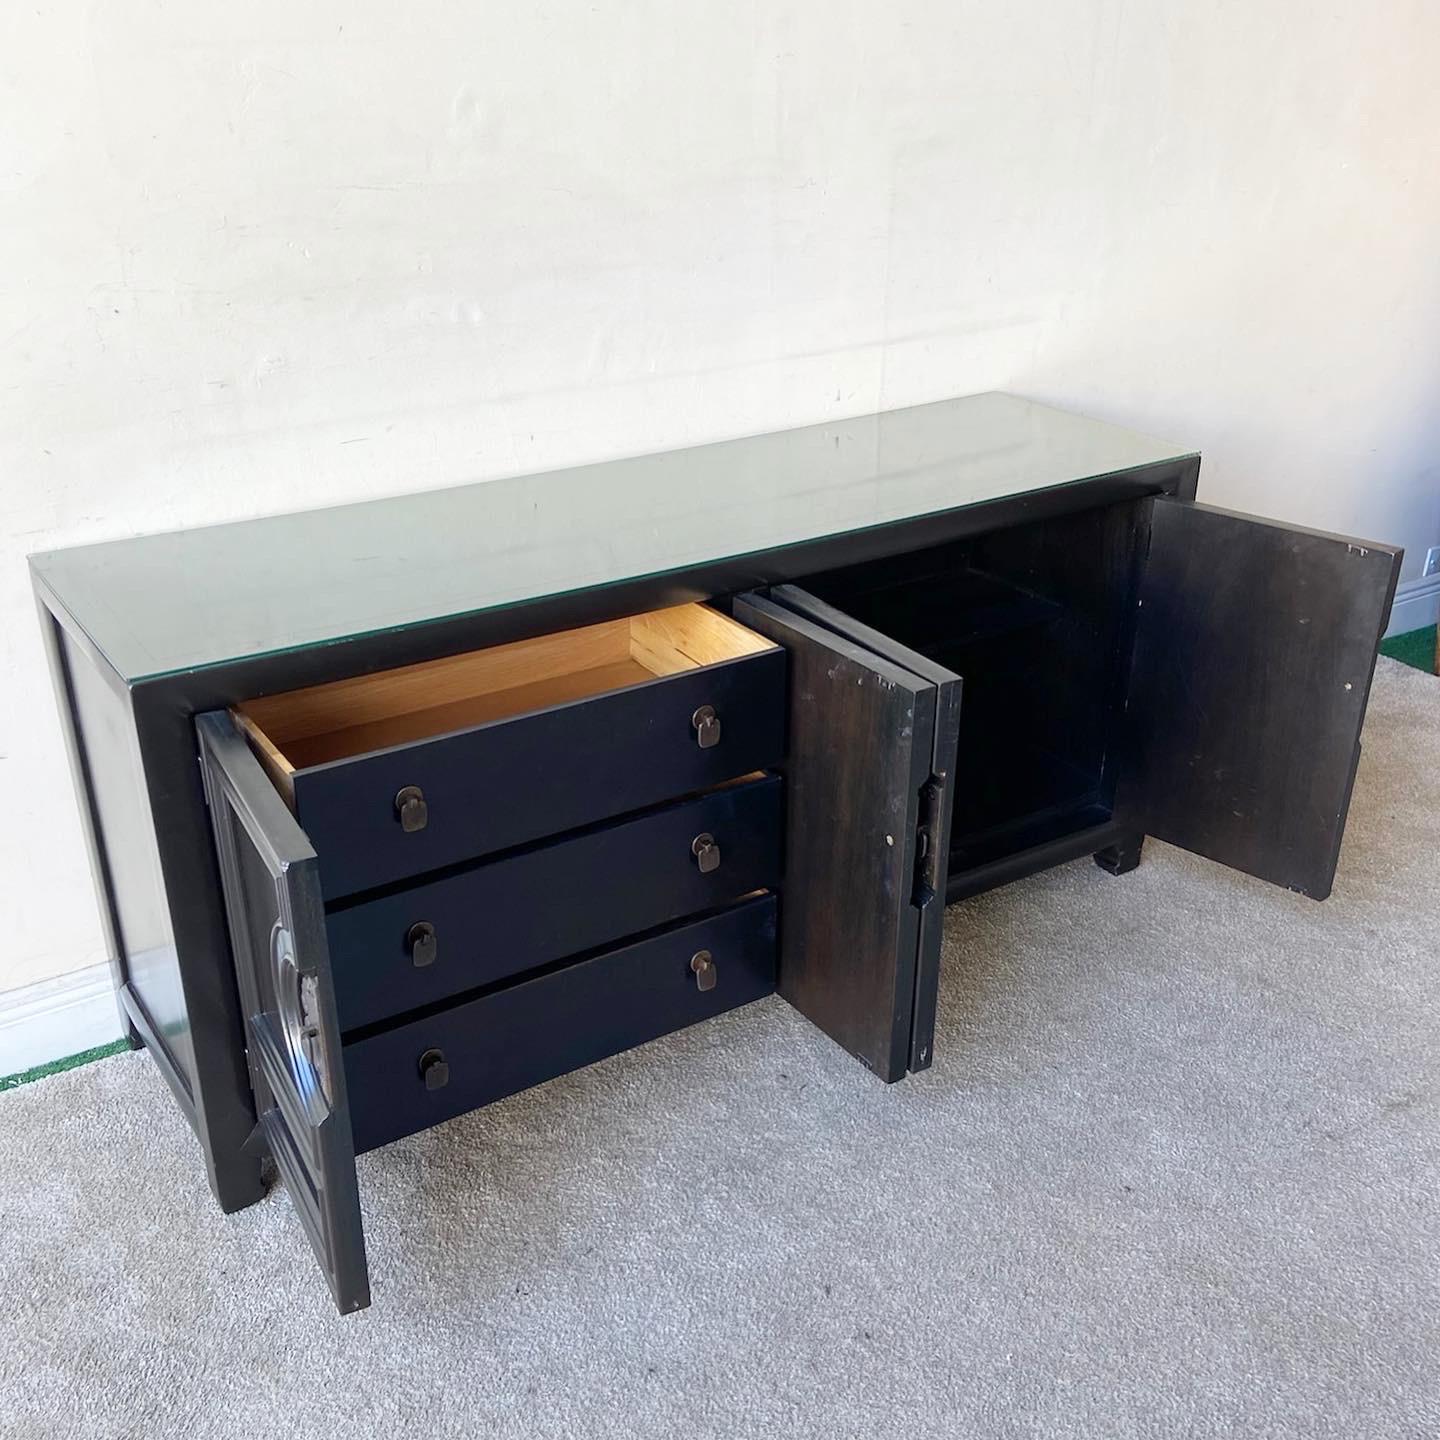 Exceptional mid century chinoiserie credenza by Century Furniture Co. Features a glass top with brass handles.

Additional information:
Material: Wood
Color: Black
Style: Mid-Century Modern
Brand: Century Furniture
Time Period: 1970s
Place of